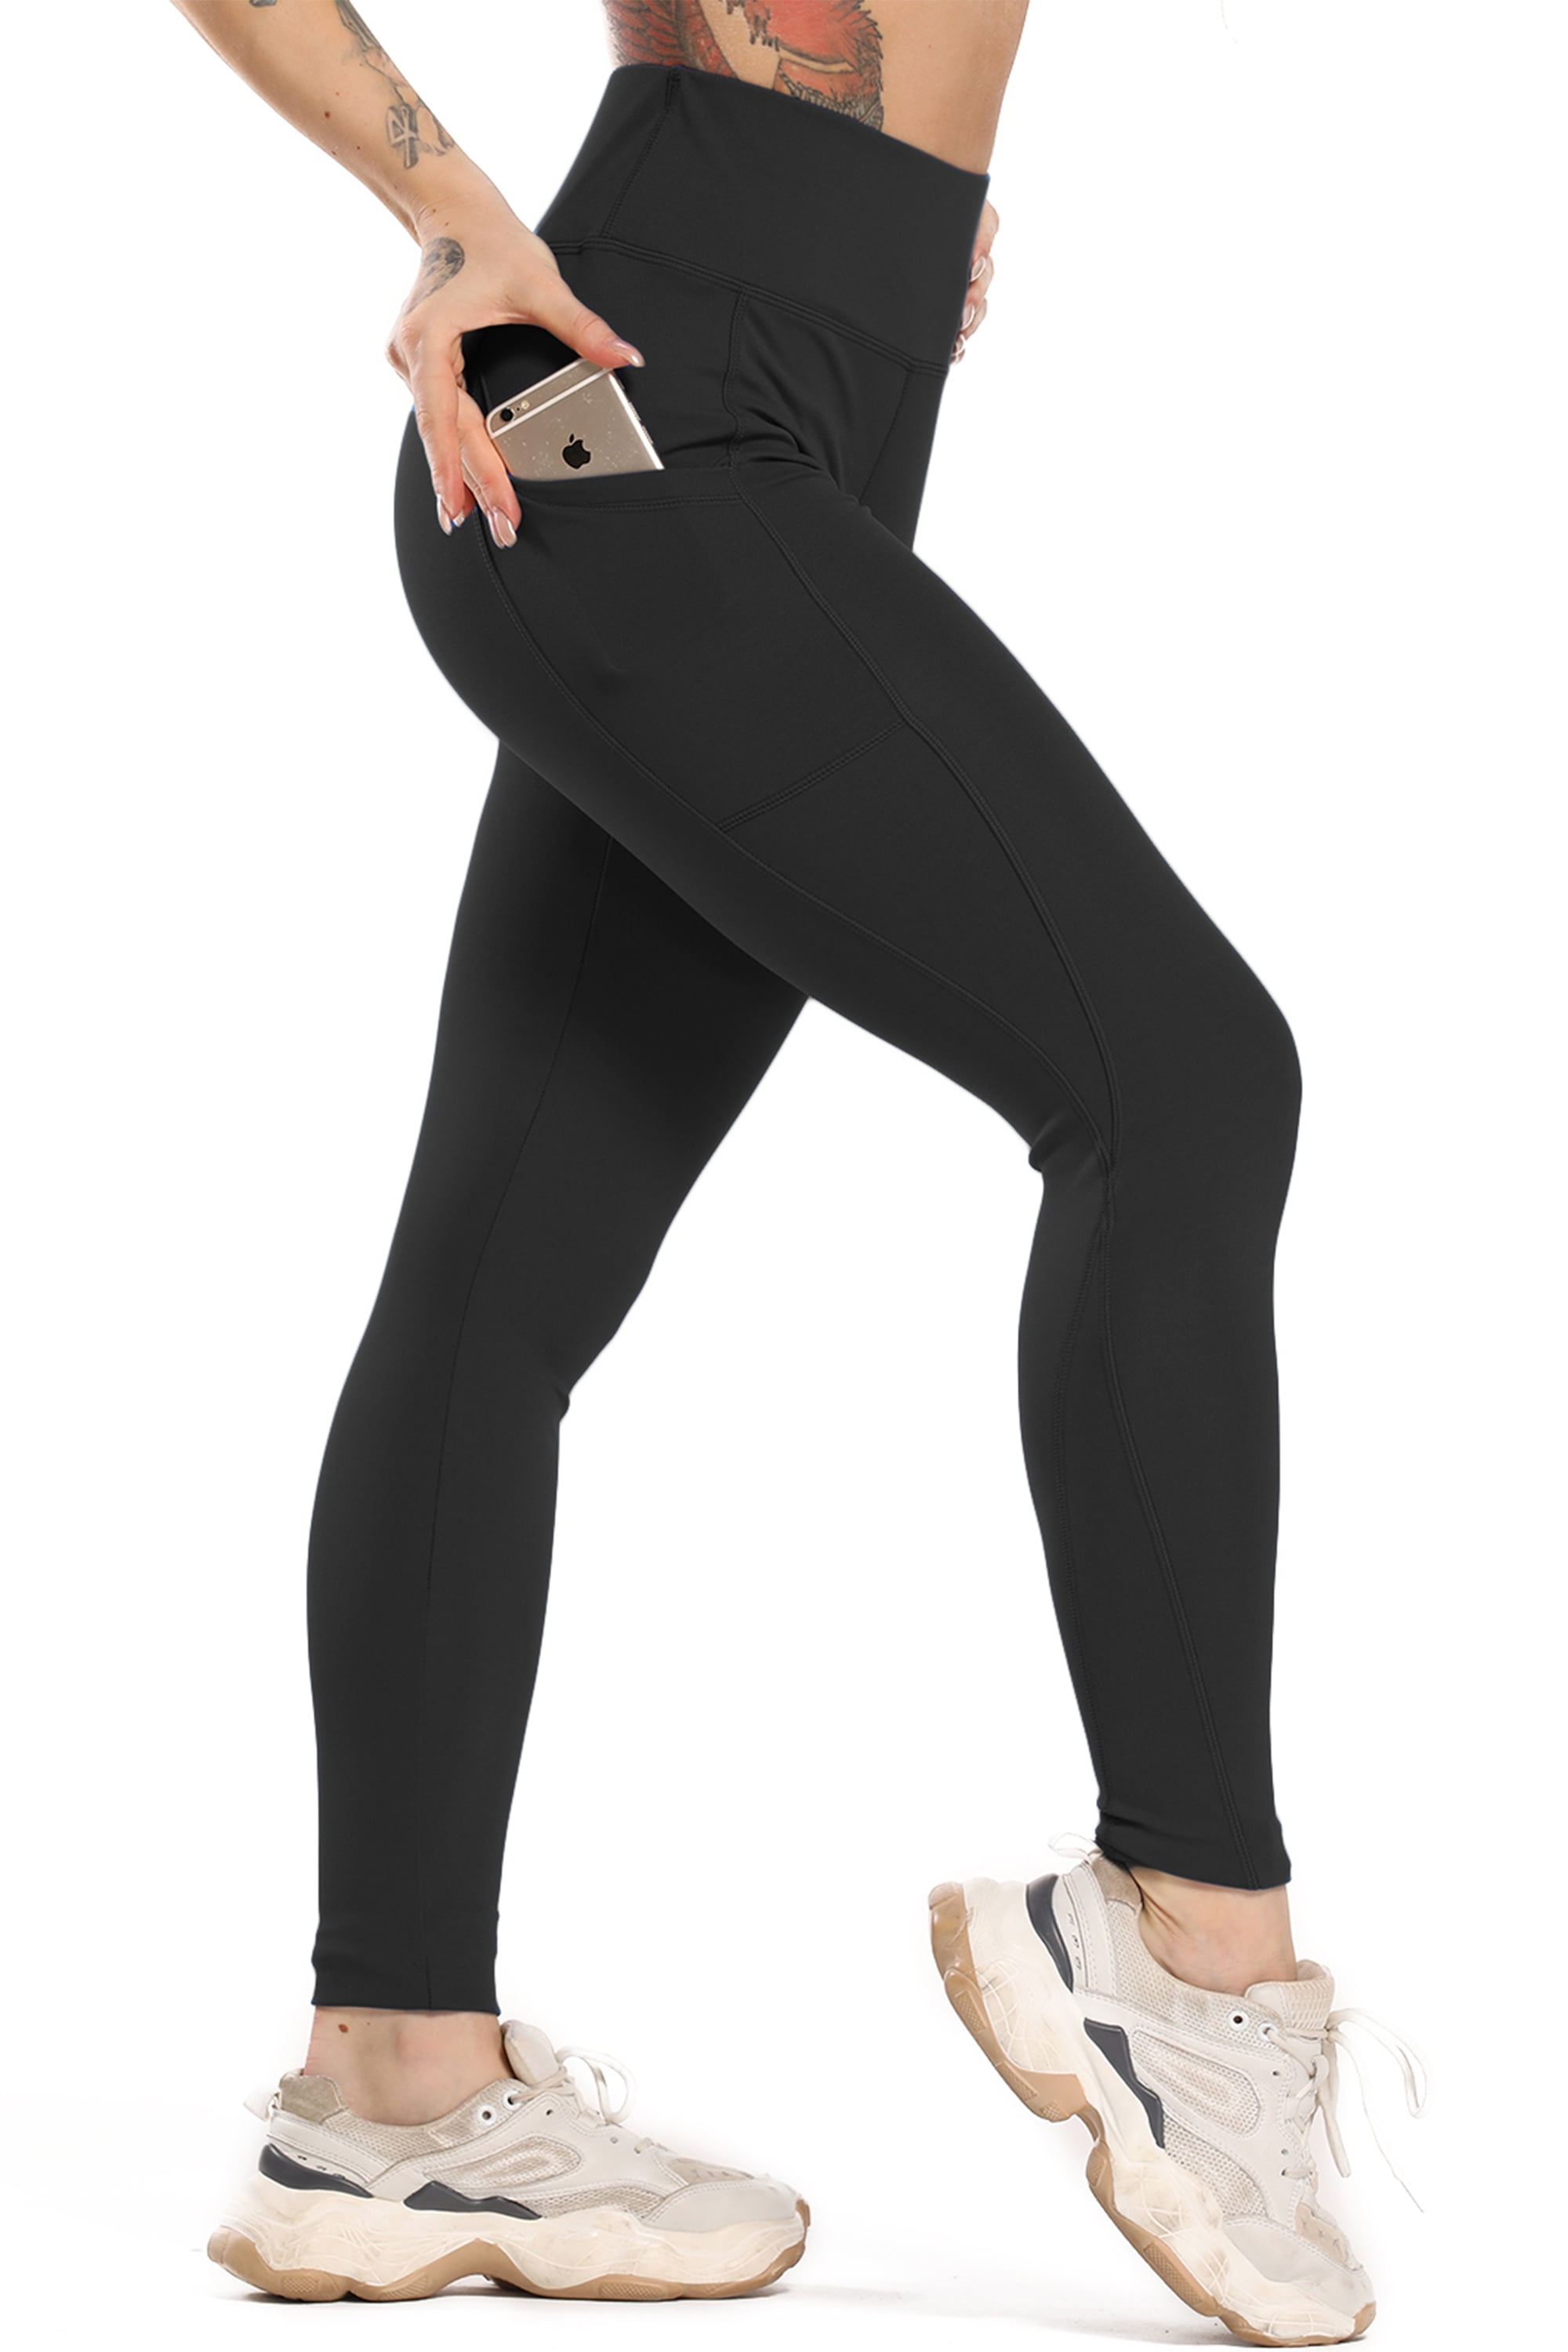  TURBOFIT Women's Yoga Leggings High Waist Tummy Control Leggings  for Women Non See Through Naked Feeling Workout Pants : Clothing, Shoes &  Jewelry